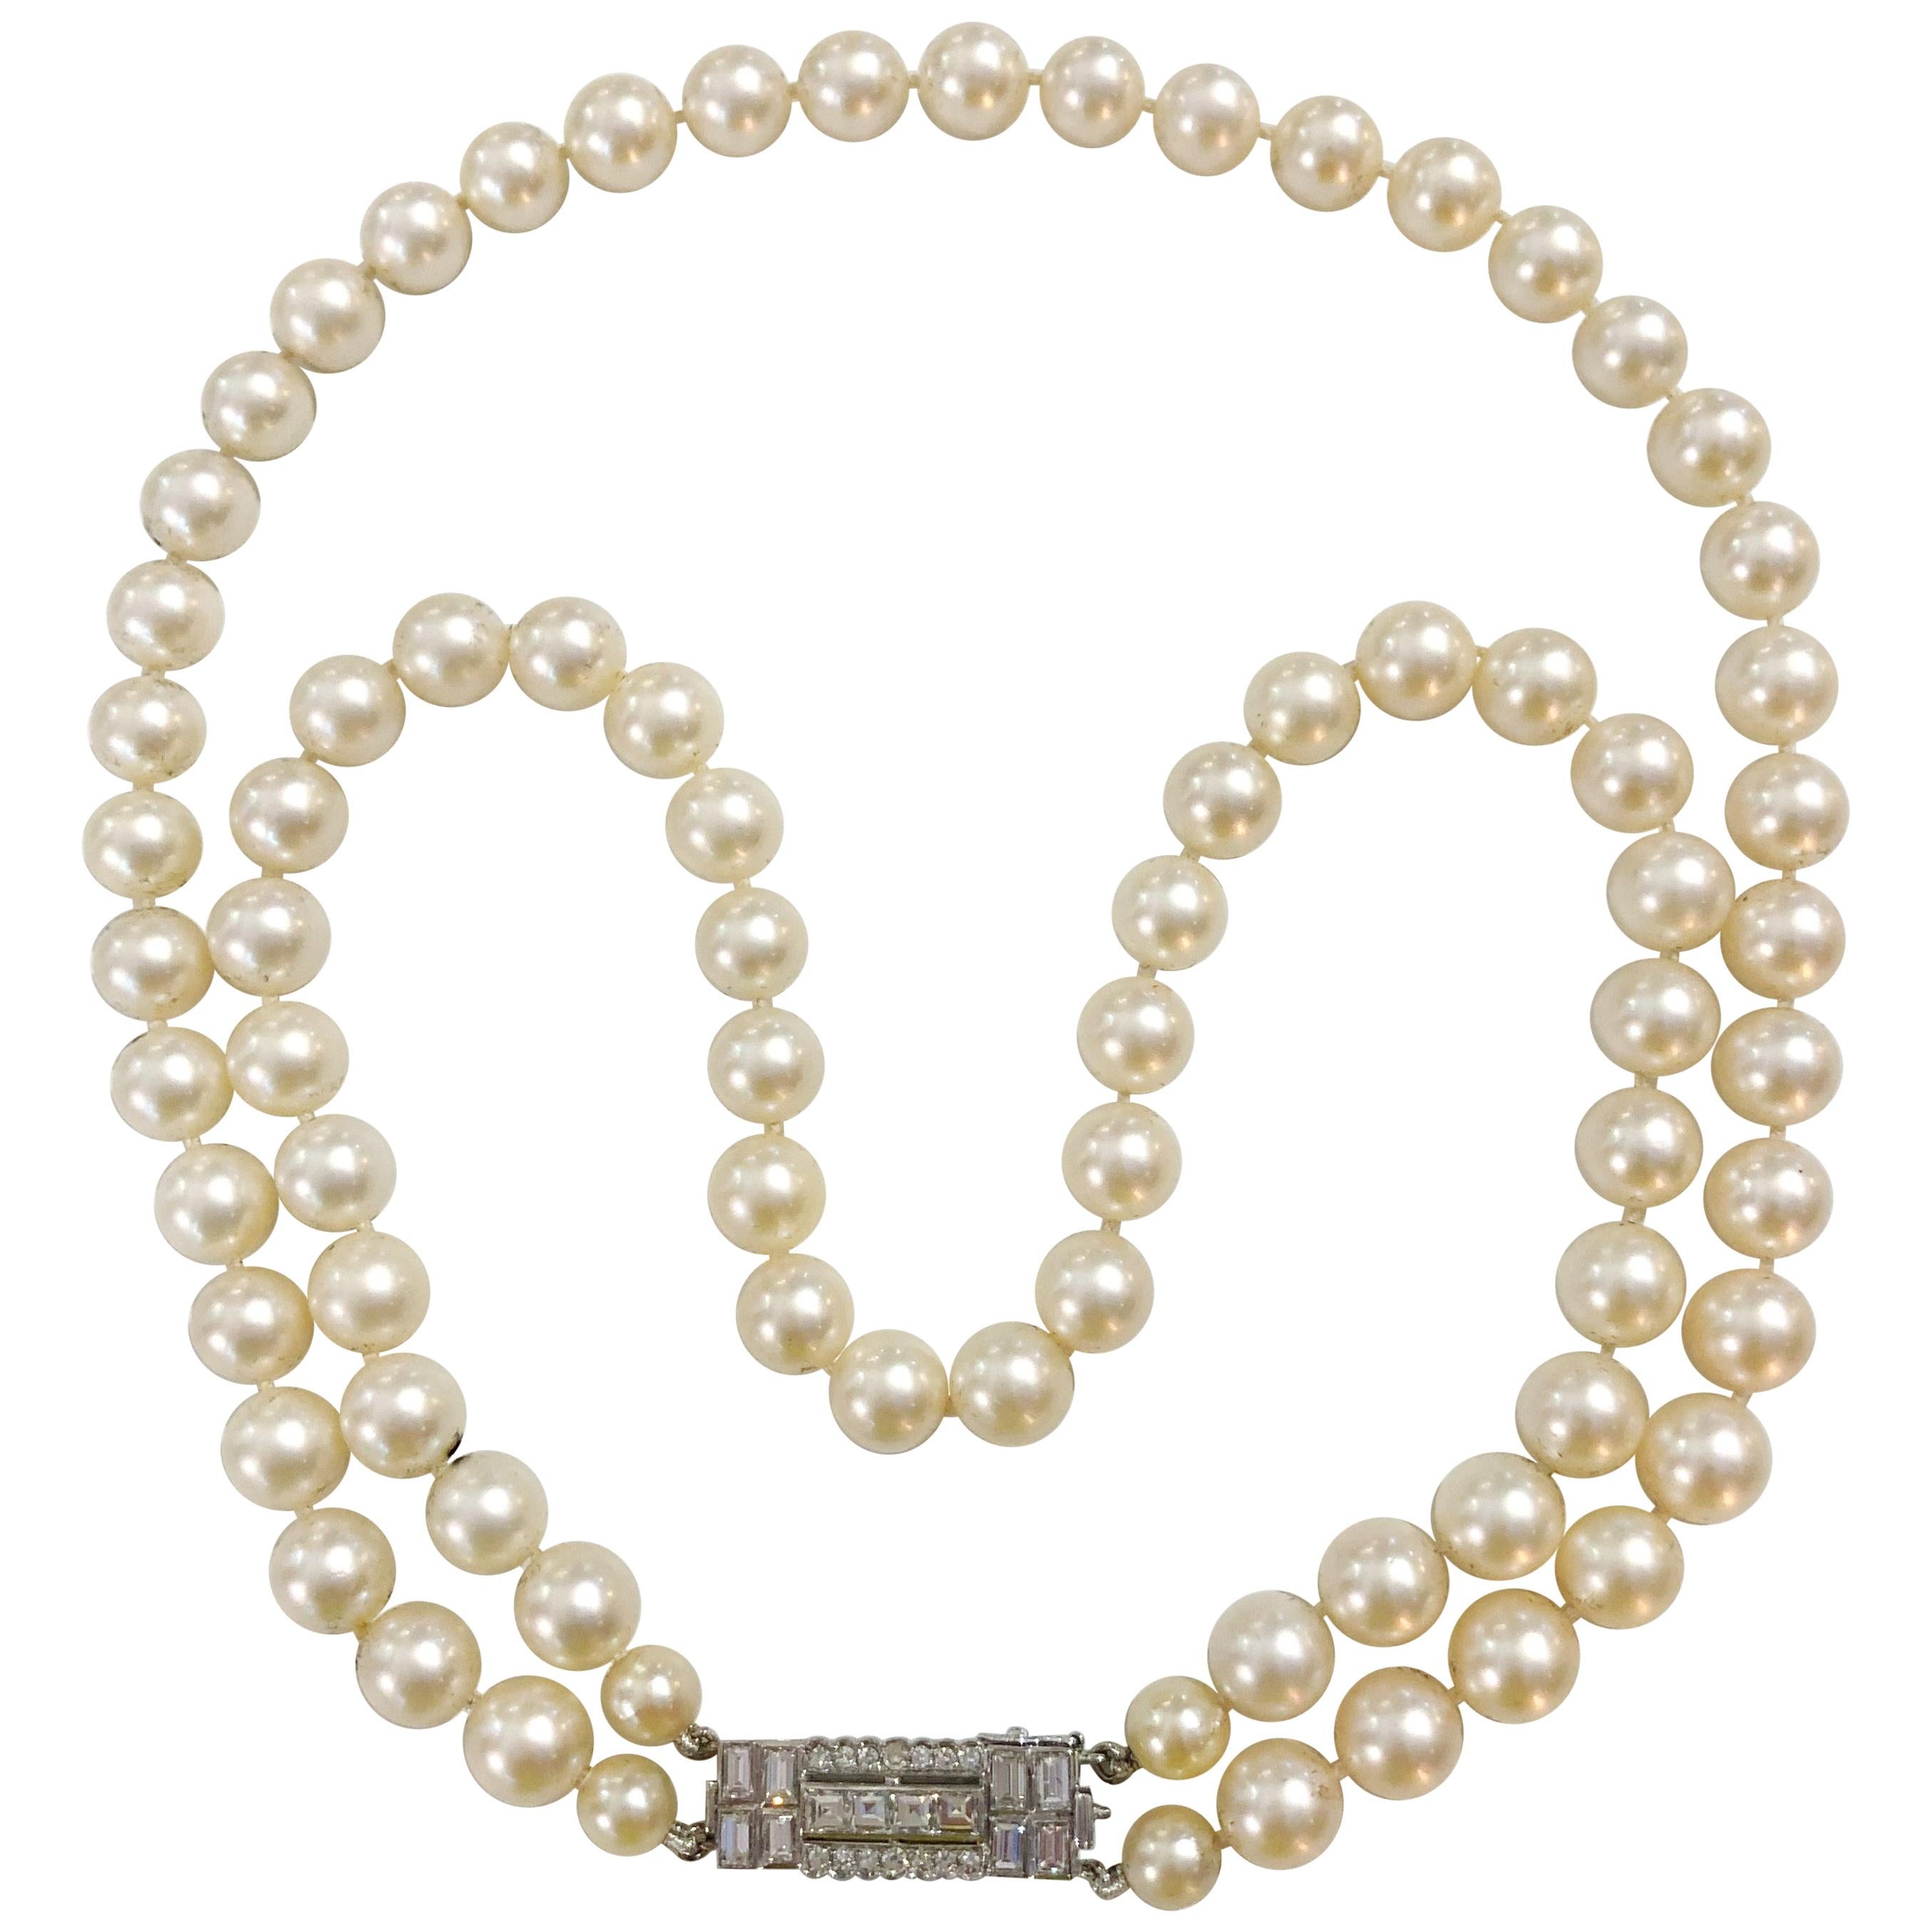 Double Stranded Pearl Necklace